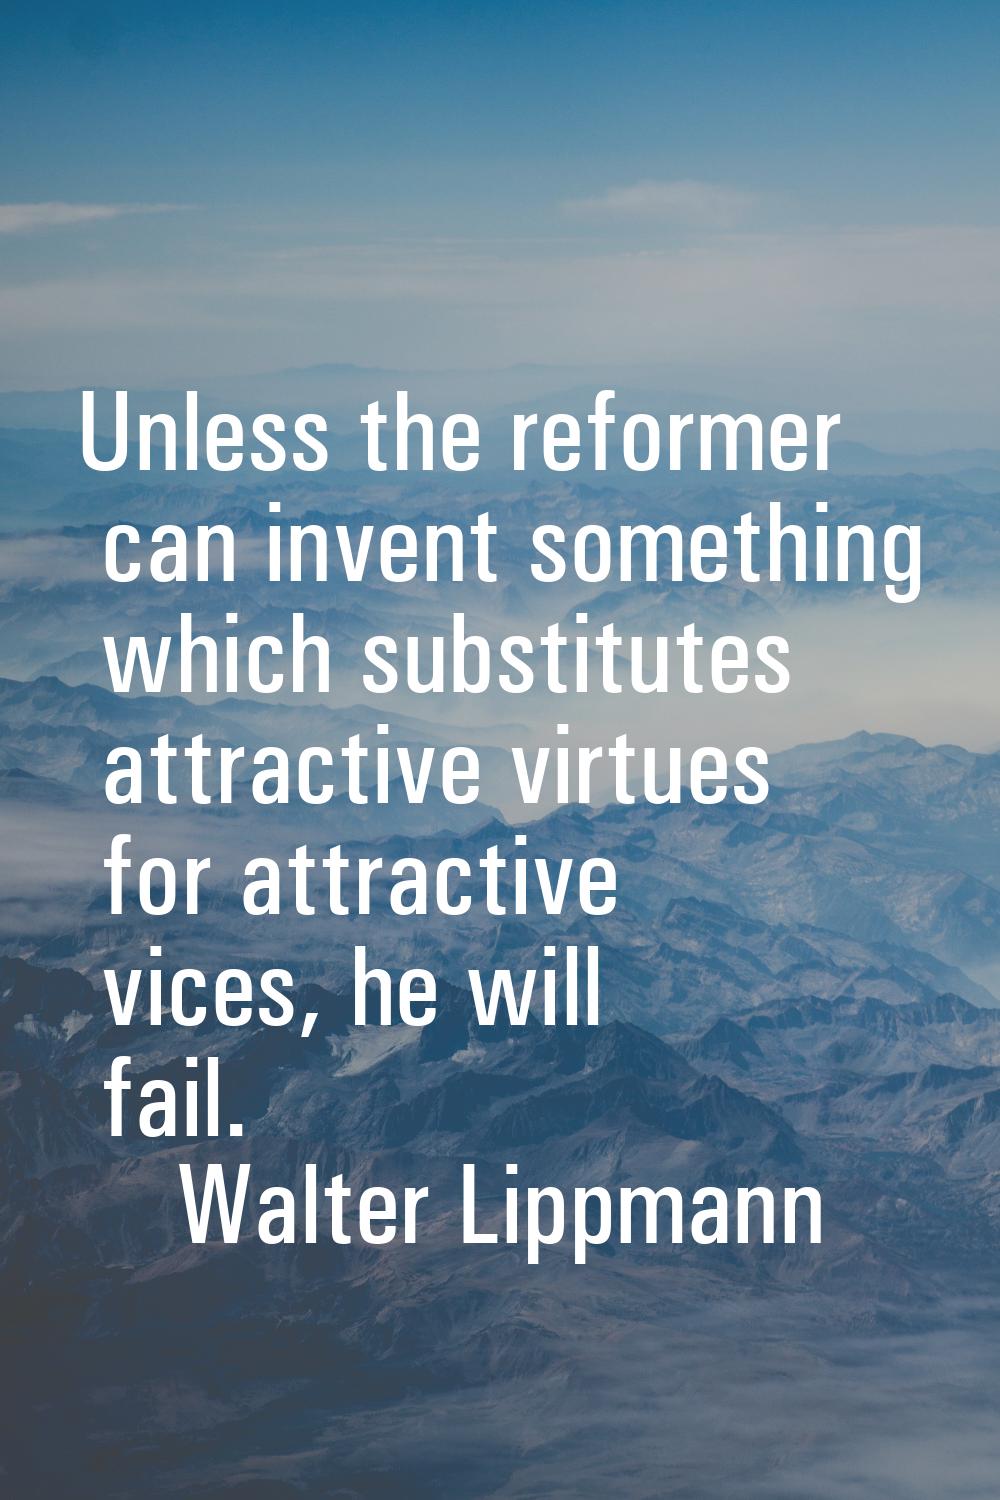 Unless the reformer can invent something which substitutes attractive virtues for attractive vices,